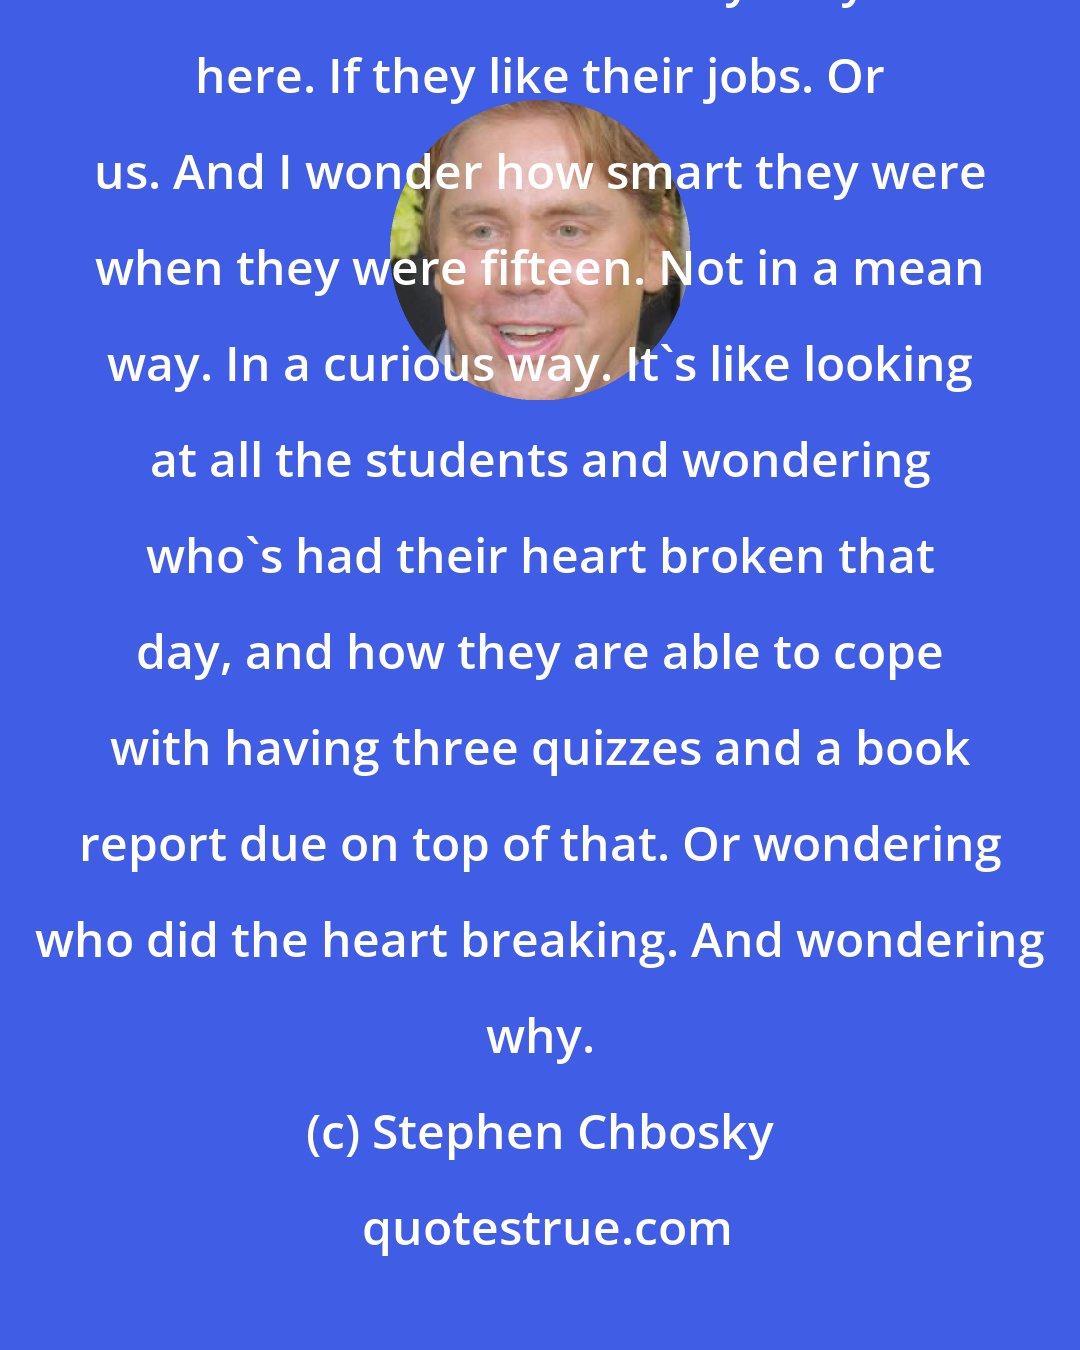 Stephen Chbosky: I walk around the school hallways and look at the people. I look at the teachers and wonder why they're here. If they like their jobs. Or us. And I wonder how smart they were when they were fifteen. Not in a mean way. In a curious way. It's like looking at all the students and wondering who's had their heart broken that day, and how they are able to cope with having three quizzes and a book report due on top of that. Or wondering who did the heart breaking. And wondering why.